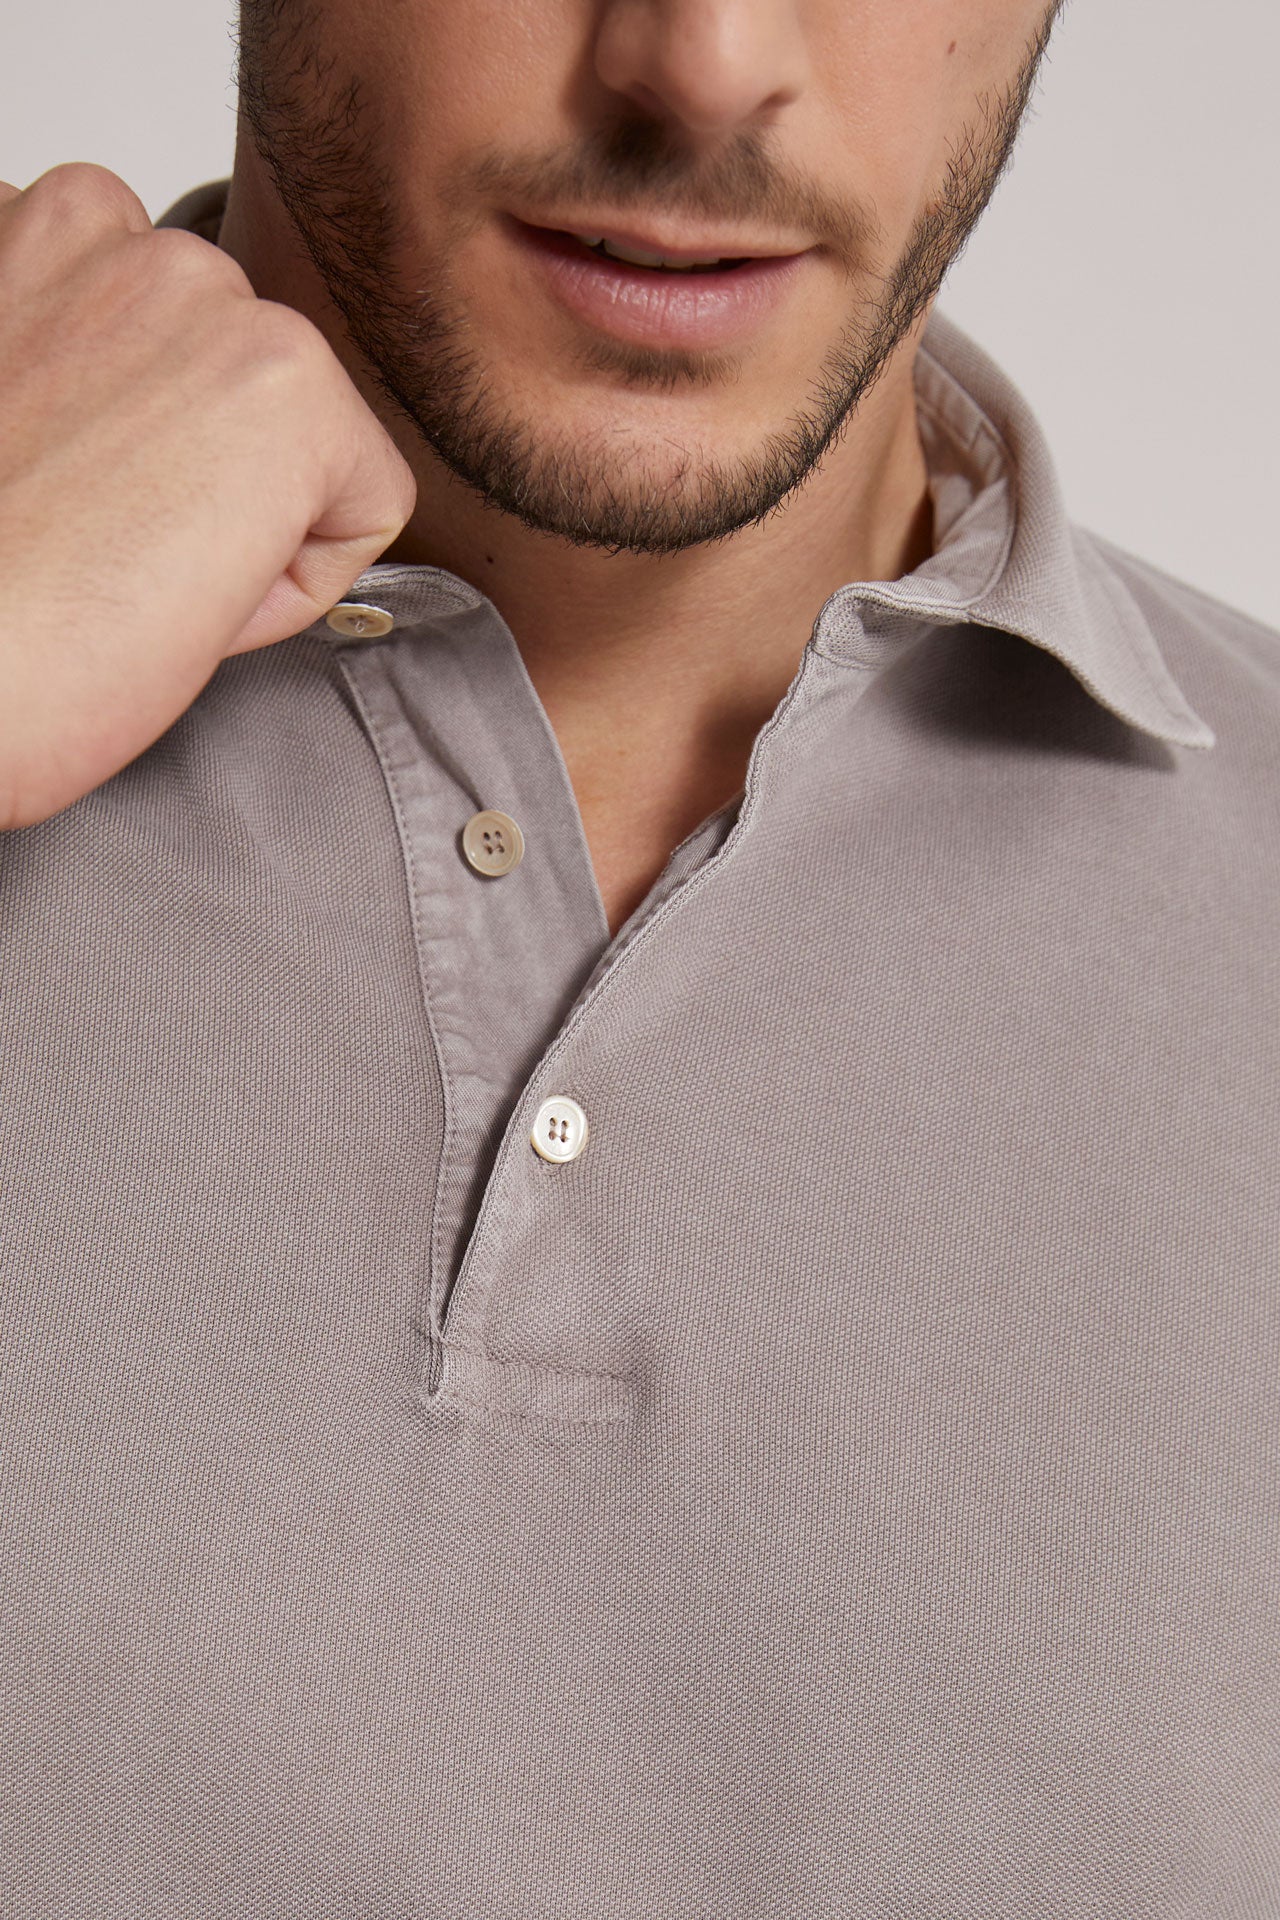 long sleeved cotton polo in grey-beige - neck detail